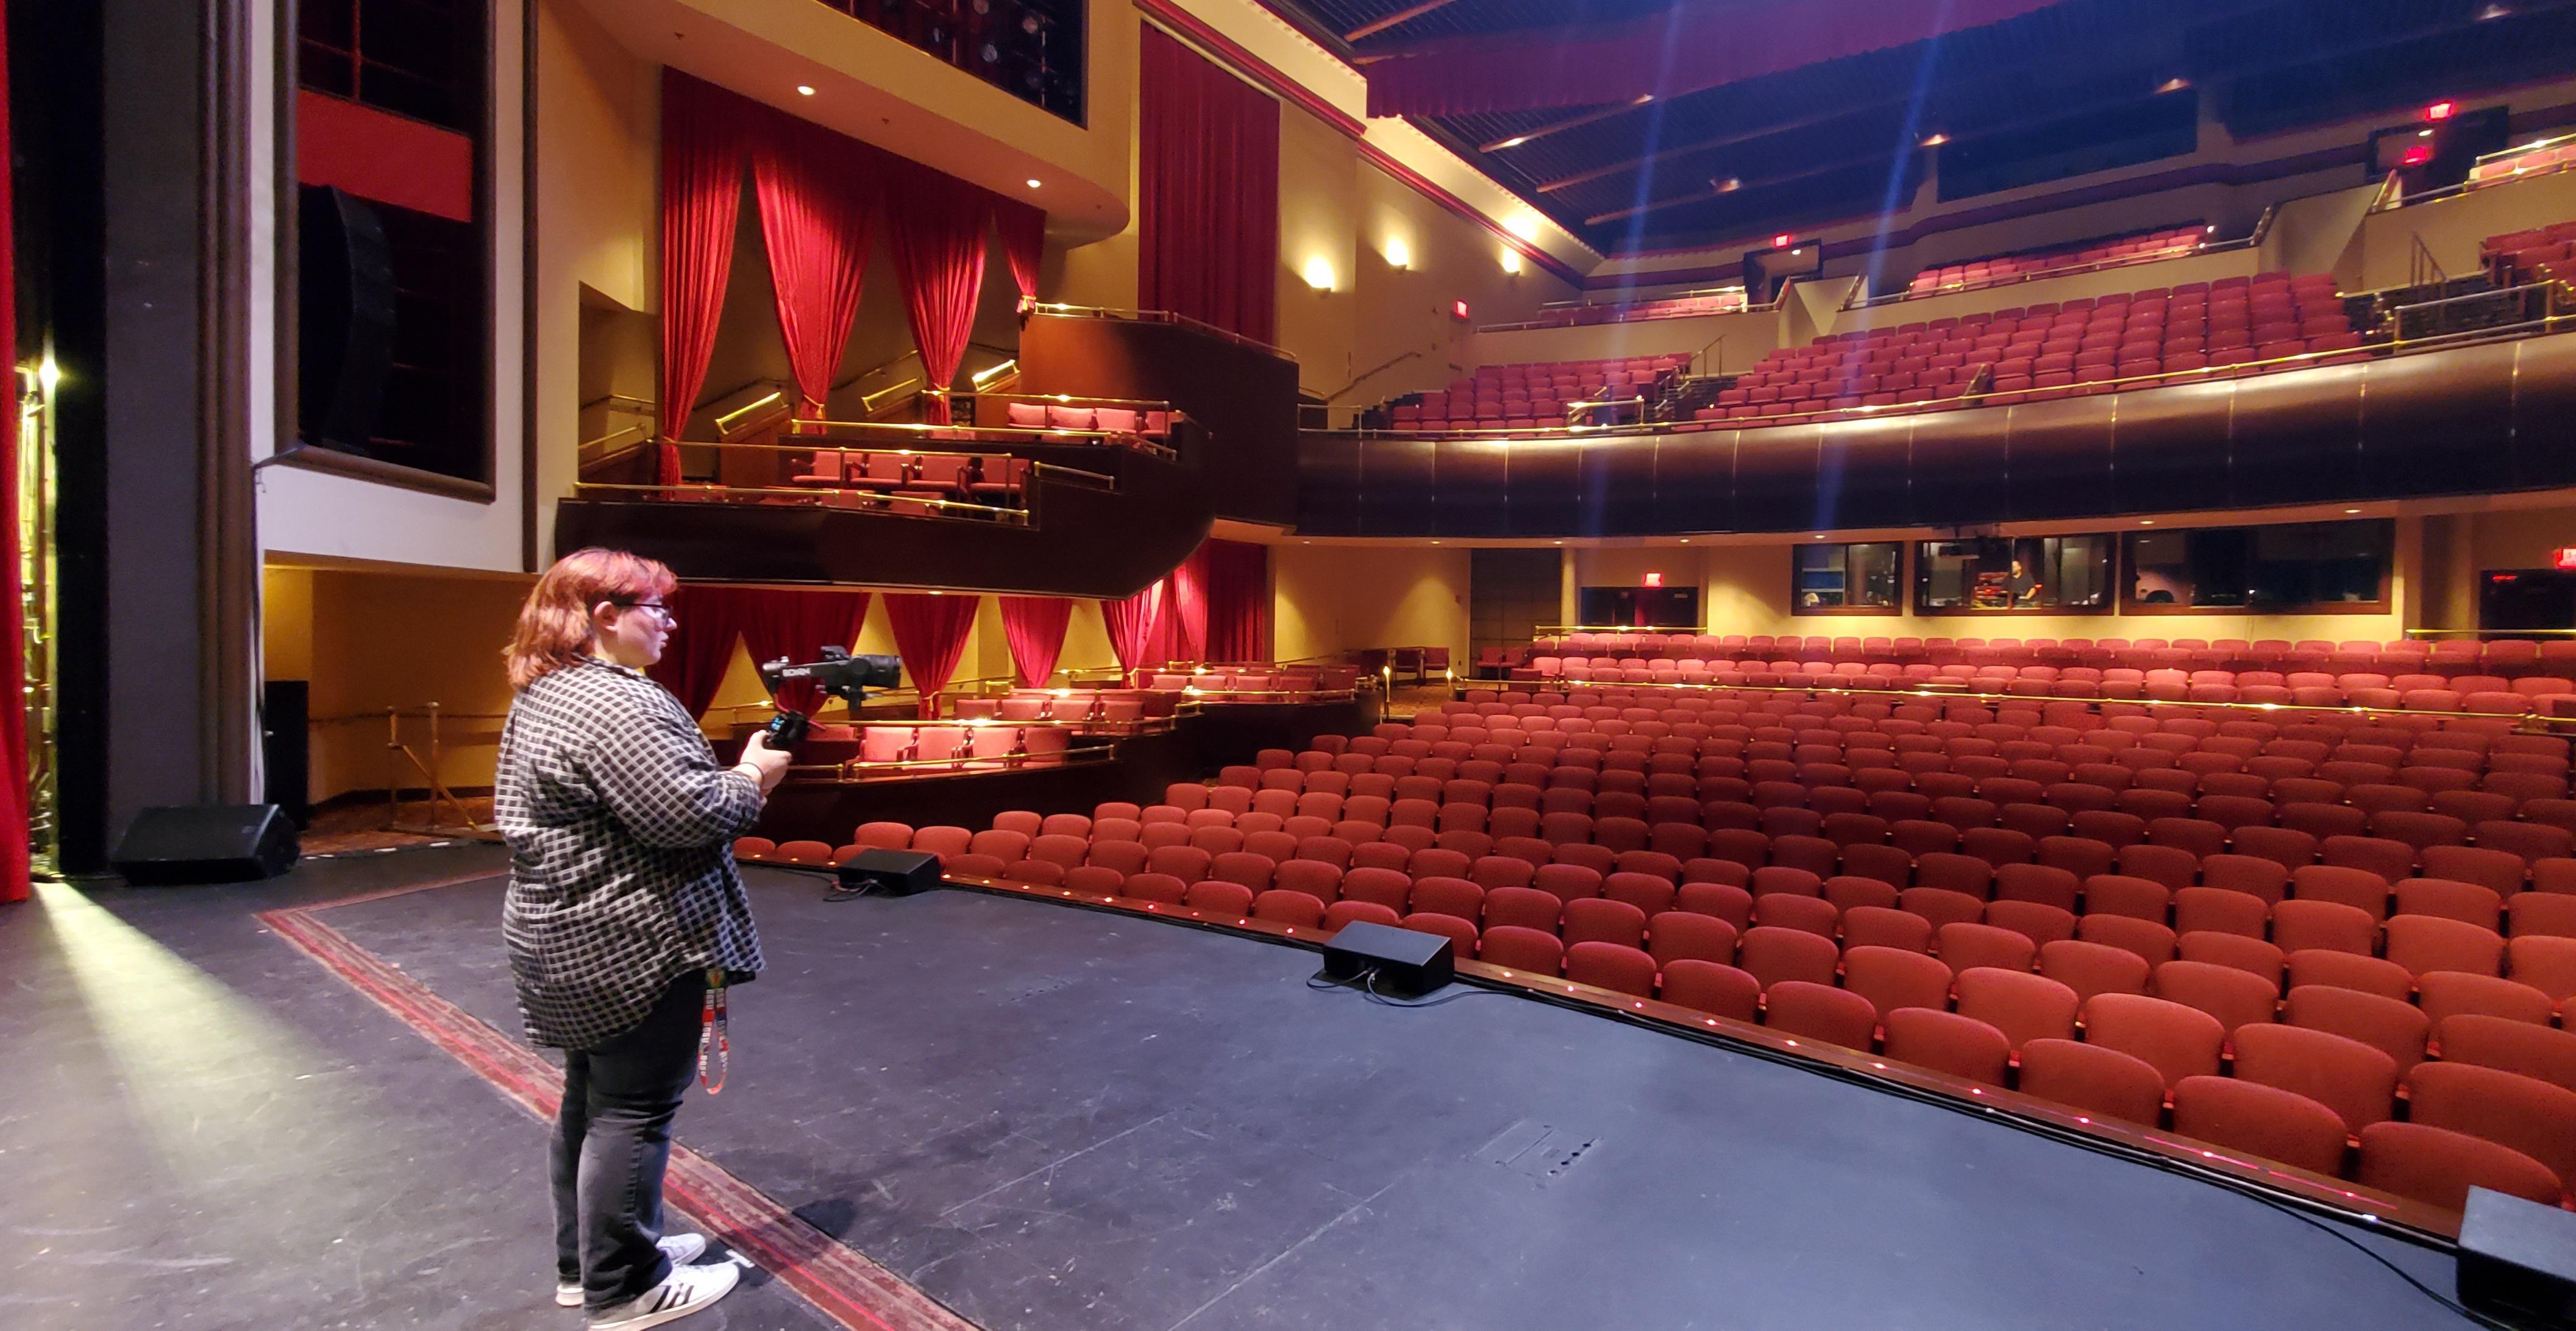 Videographer on a theater stage